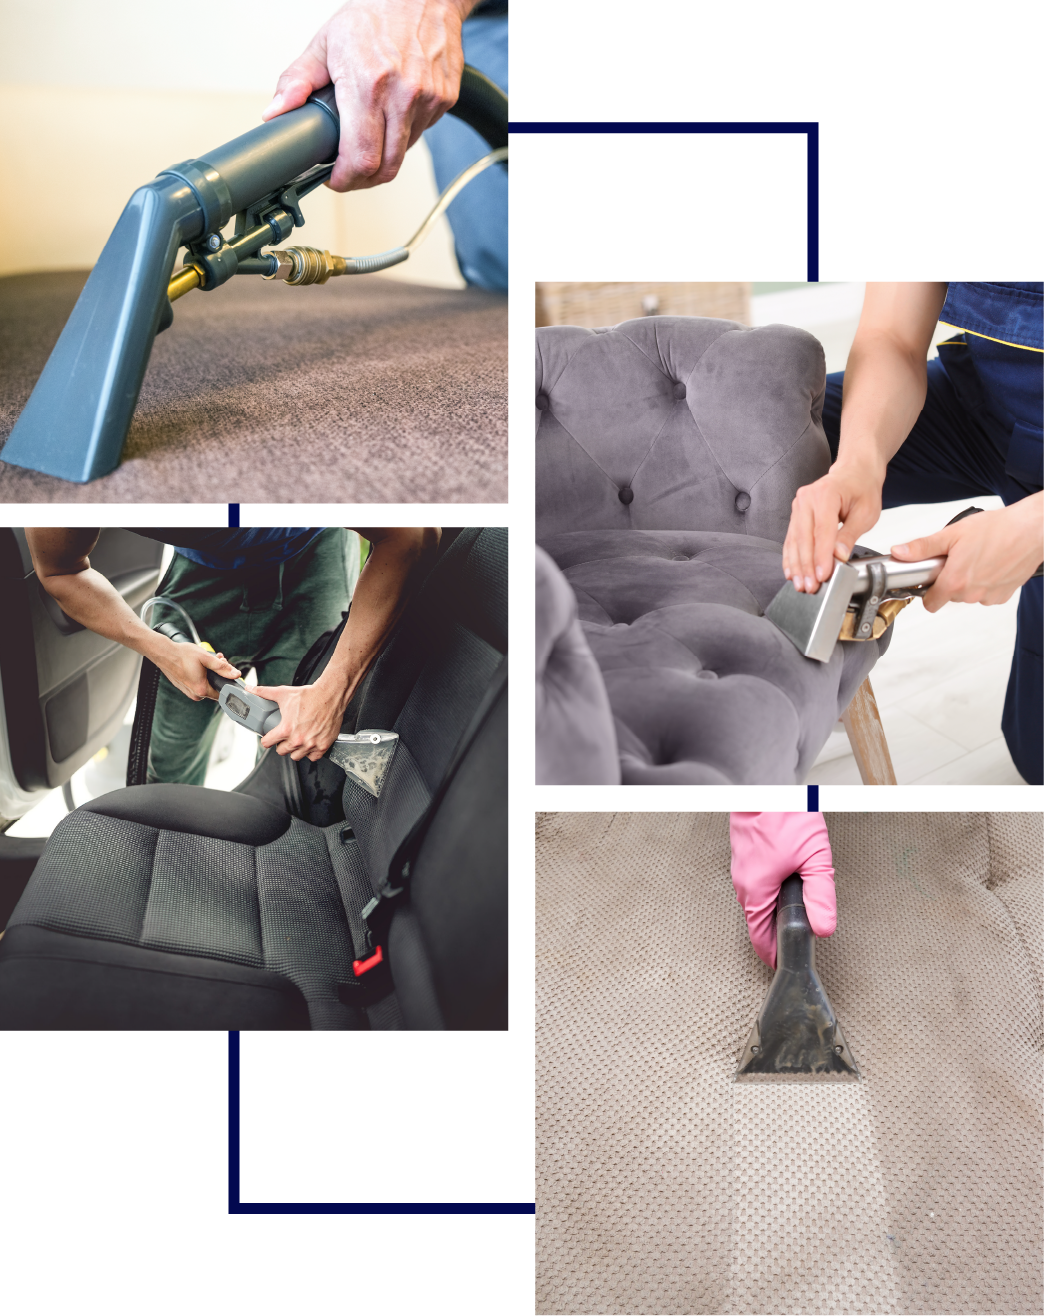 East End Steam Long Island Upholstery Cleaning